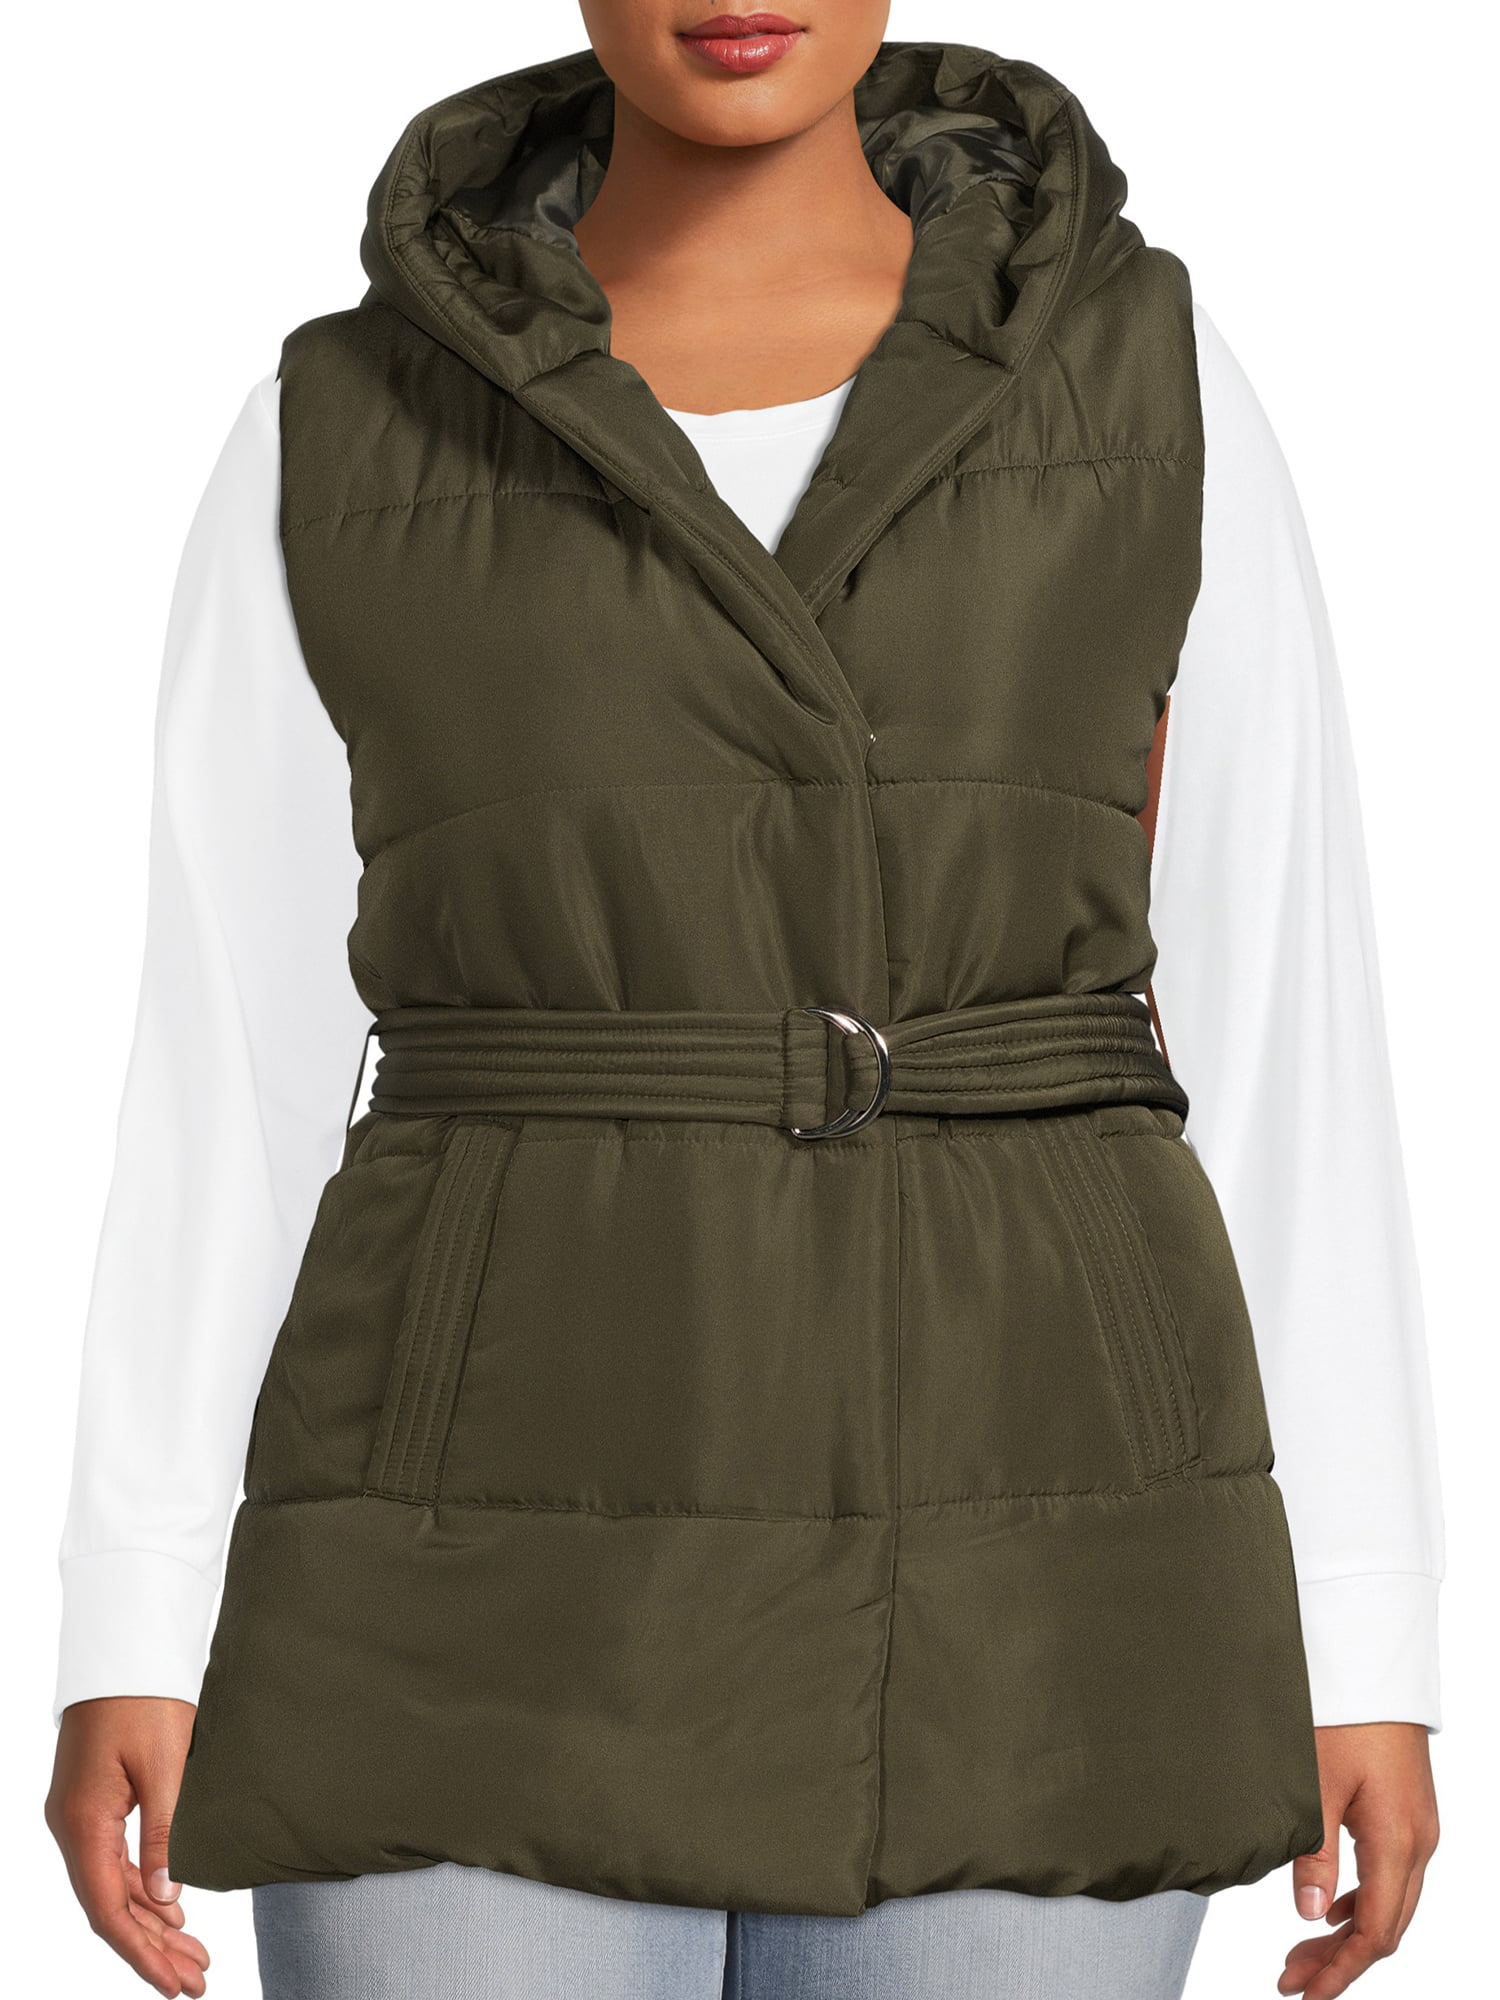 Jason Maxwell Women's Plus Size Belted Puffer Vest with Hood